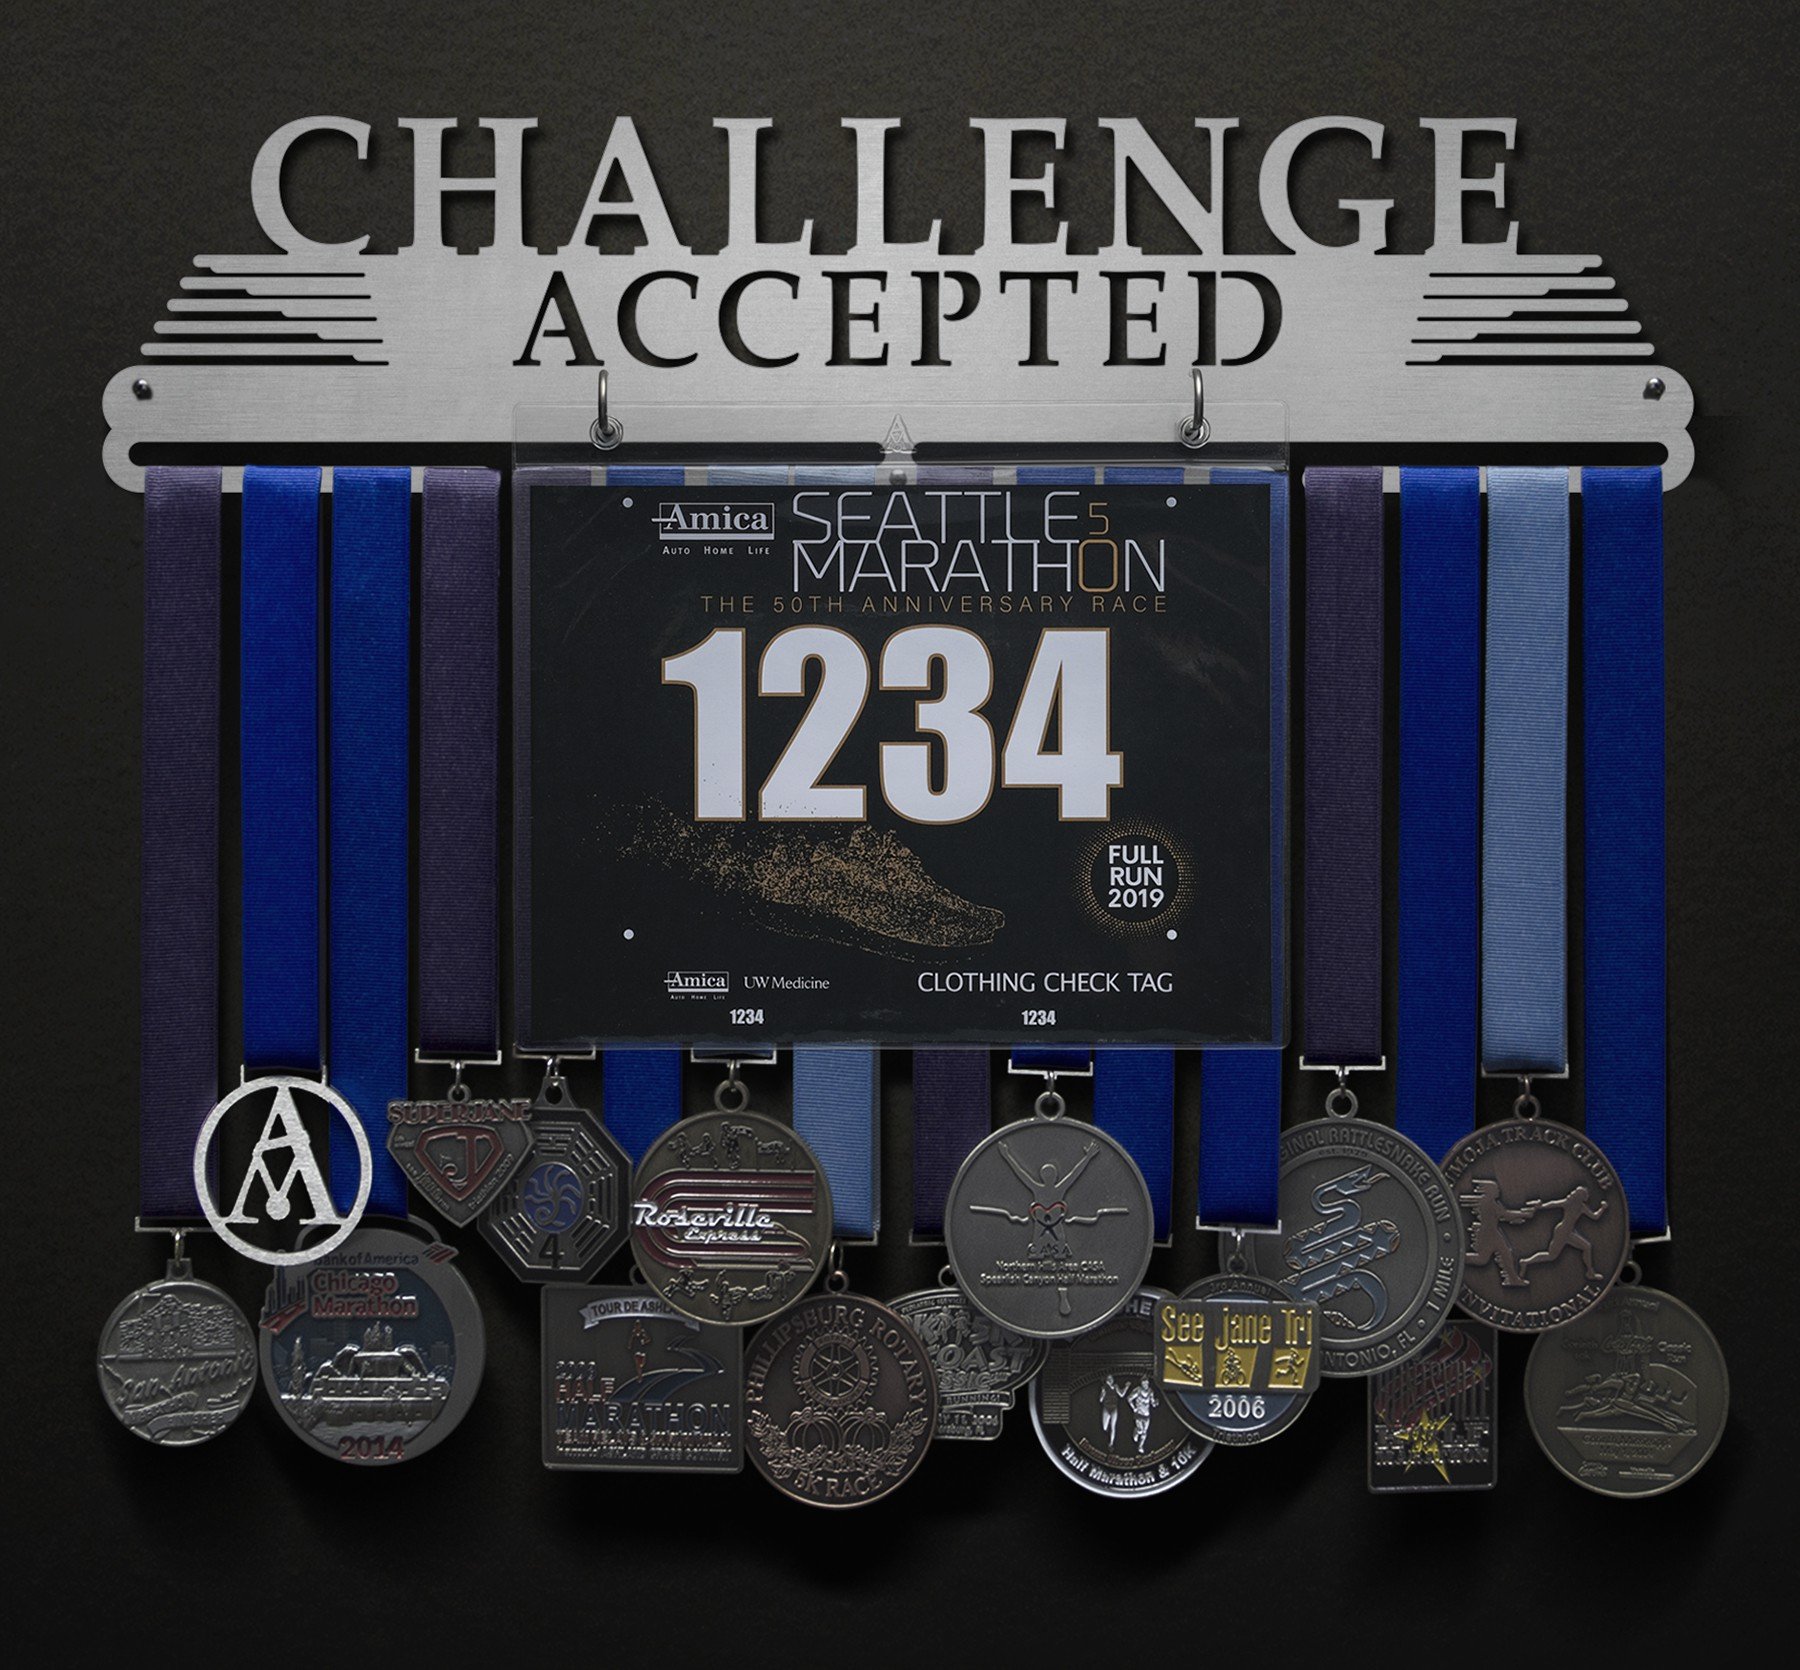 Challenge Accepted Bib and Medal Display